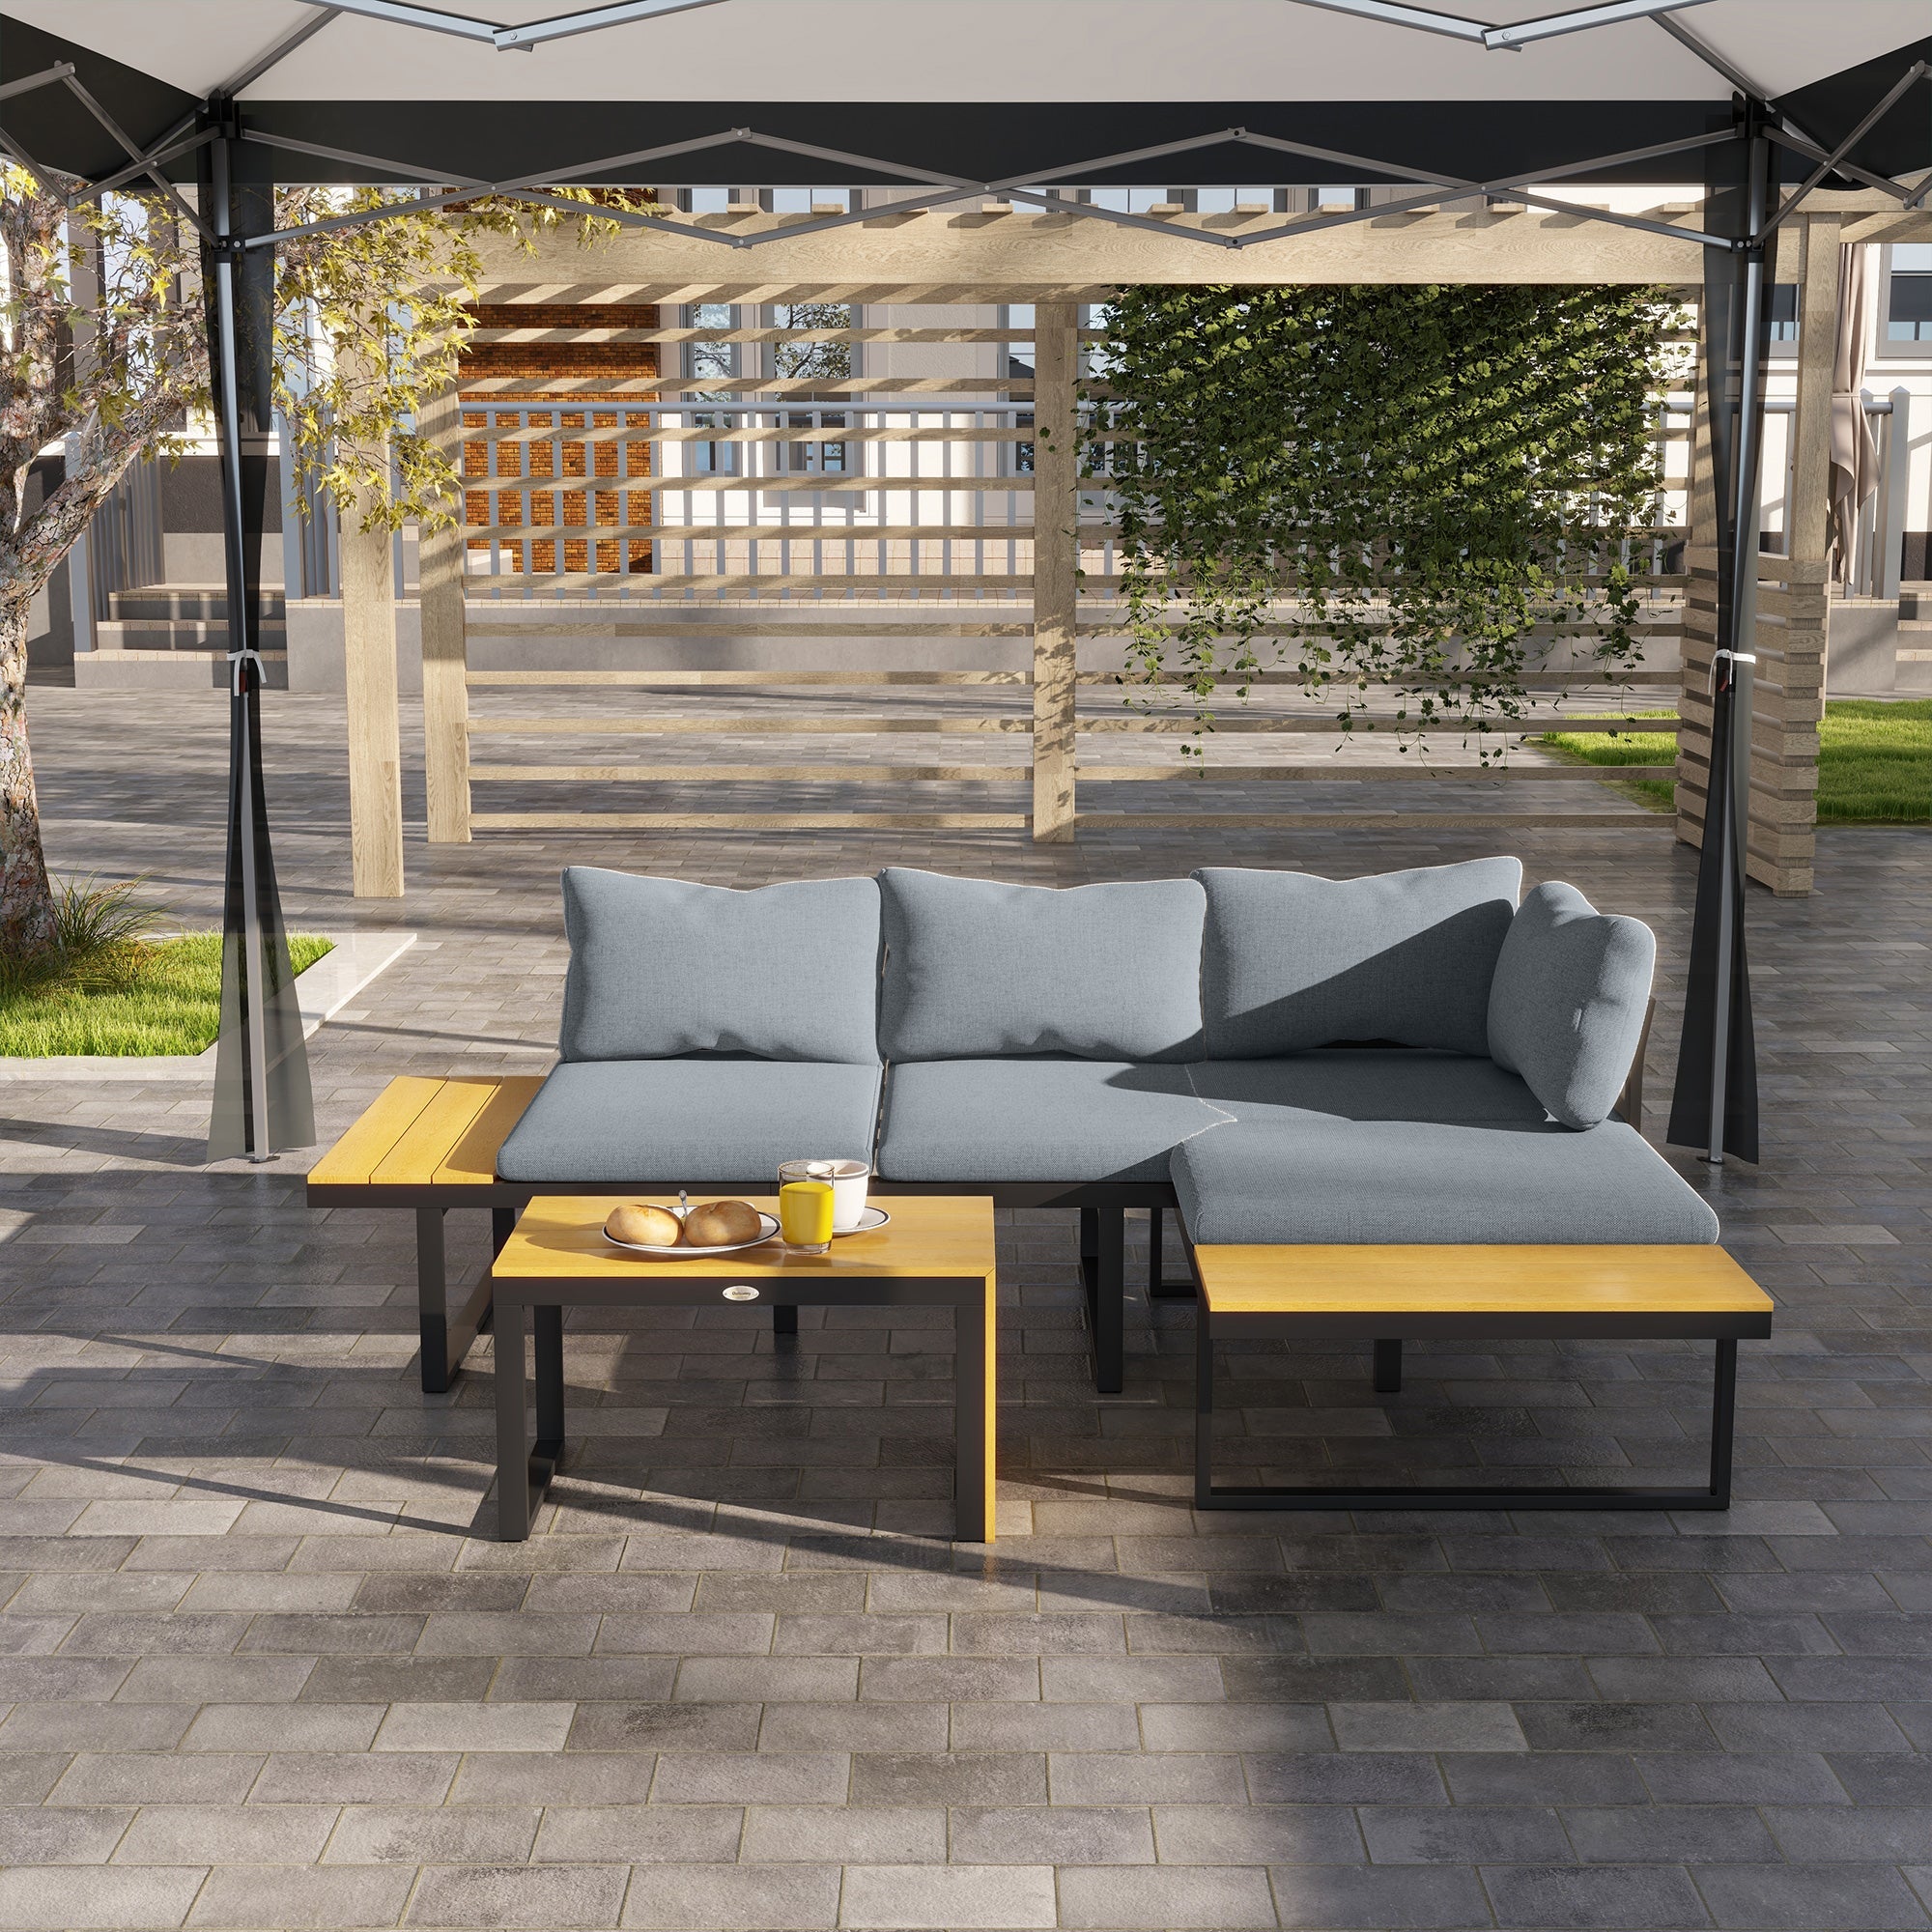 Outsunny 4-Seater Garden Sofa Set Patio Conversation Set w/ Padded Cushions, Wood Grain Plastic Top Table and Side Panel, Dark Grey - TovaHaus